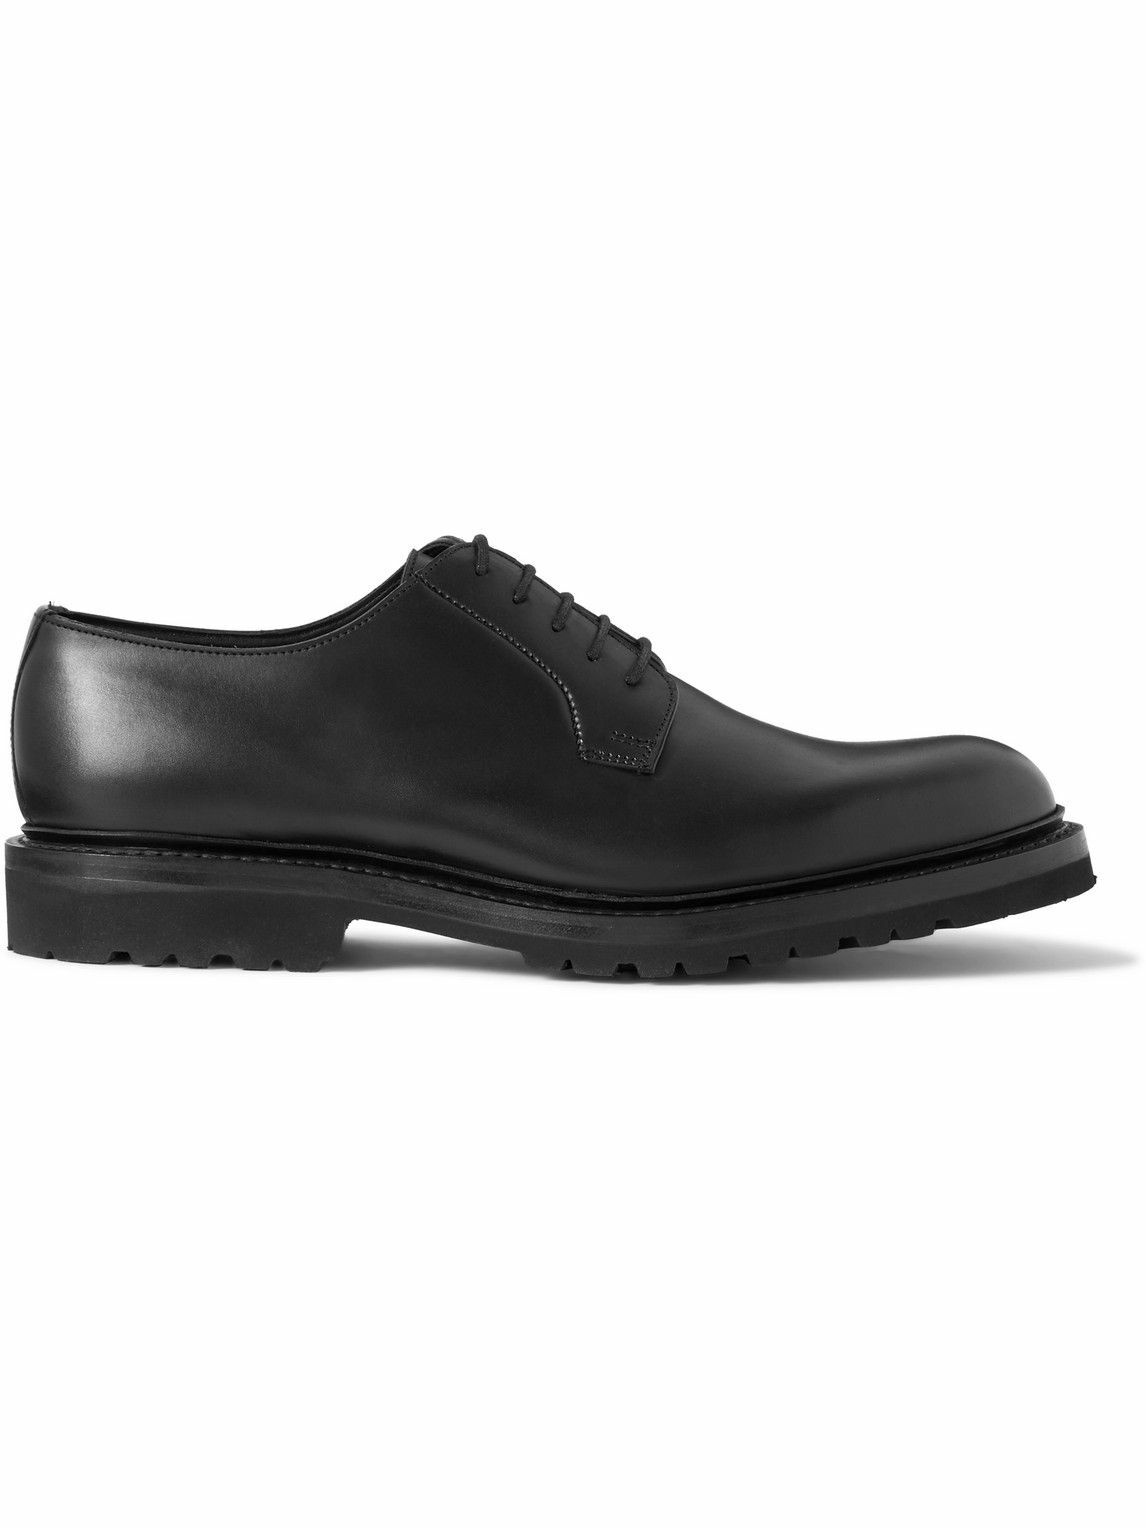 Photo: George Cleverley - Archie Leather Derby Shoes - Black